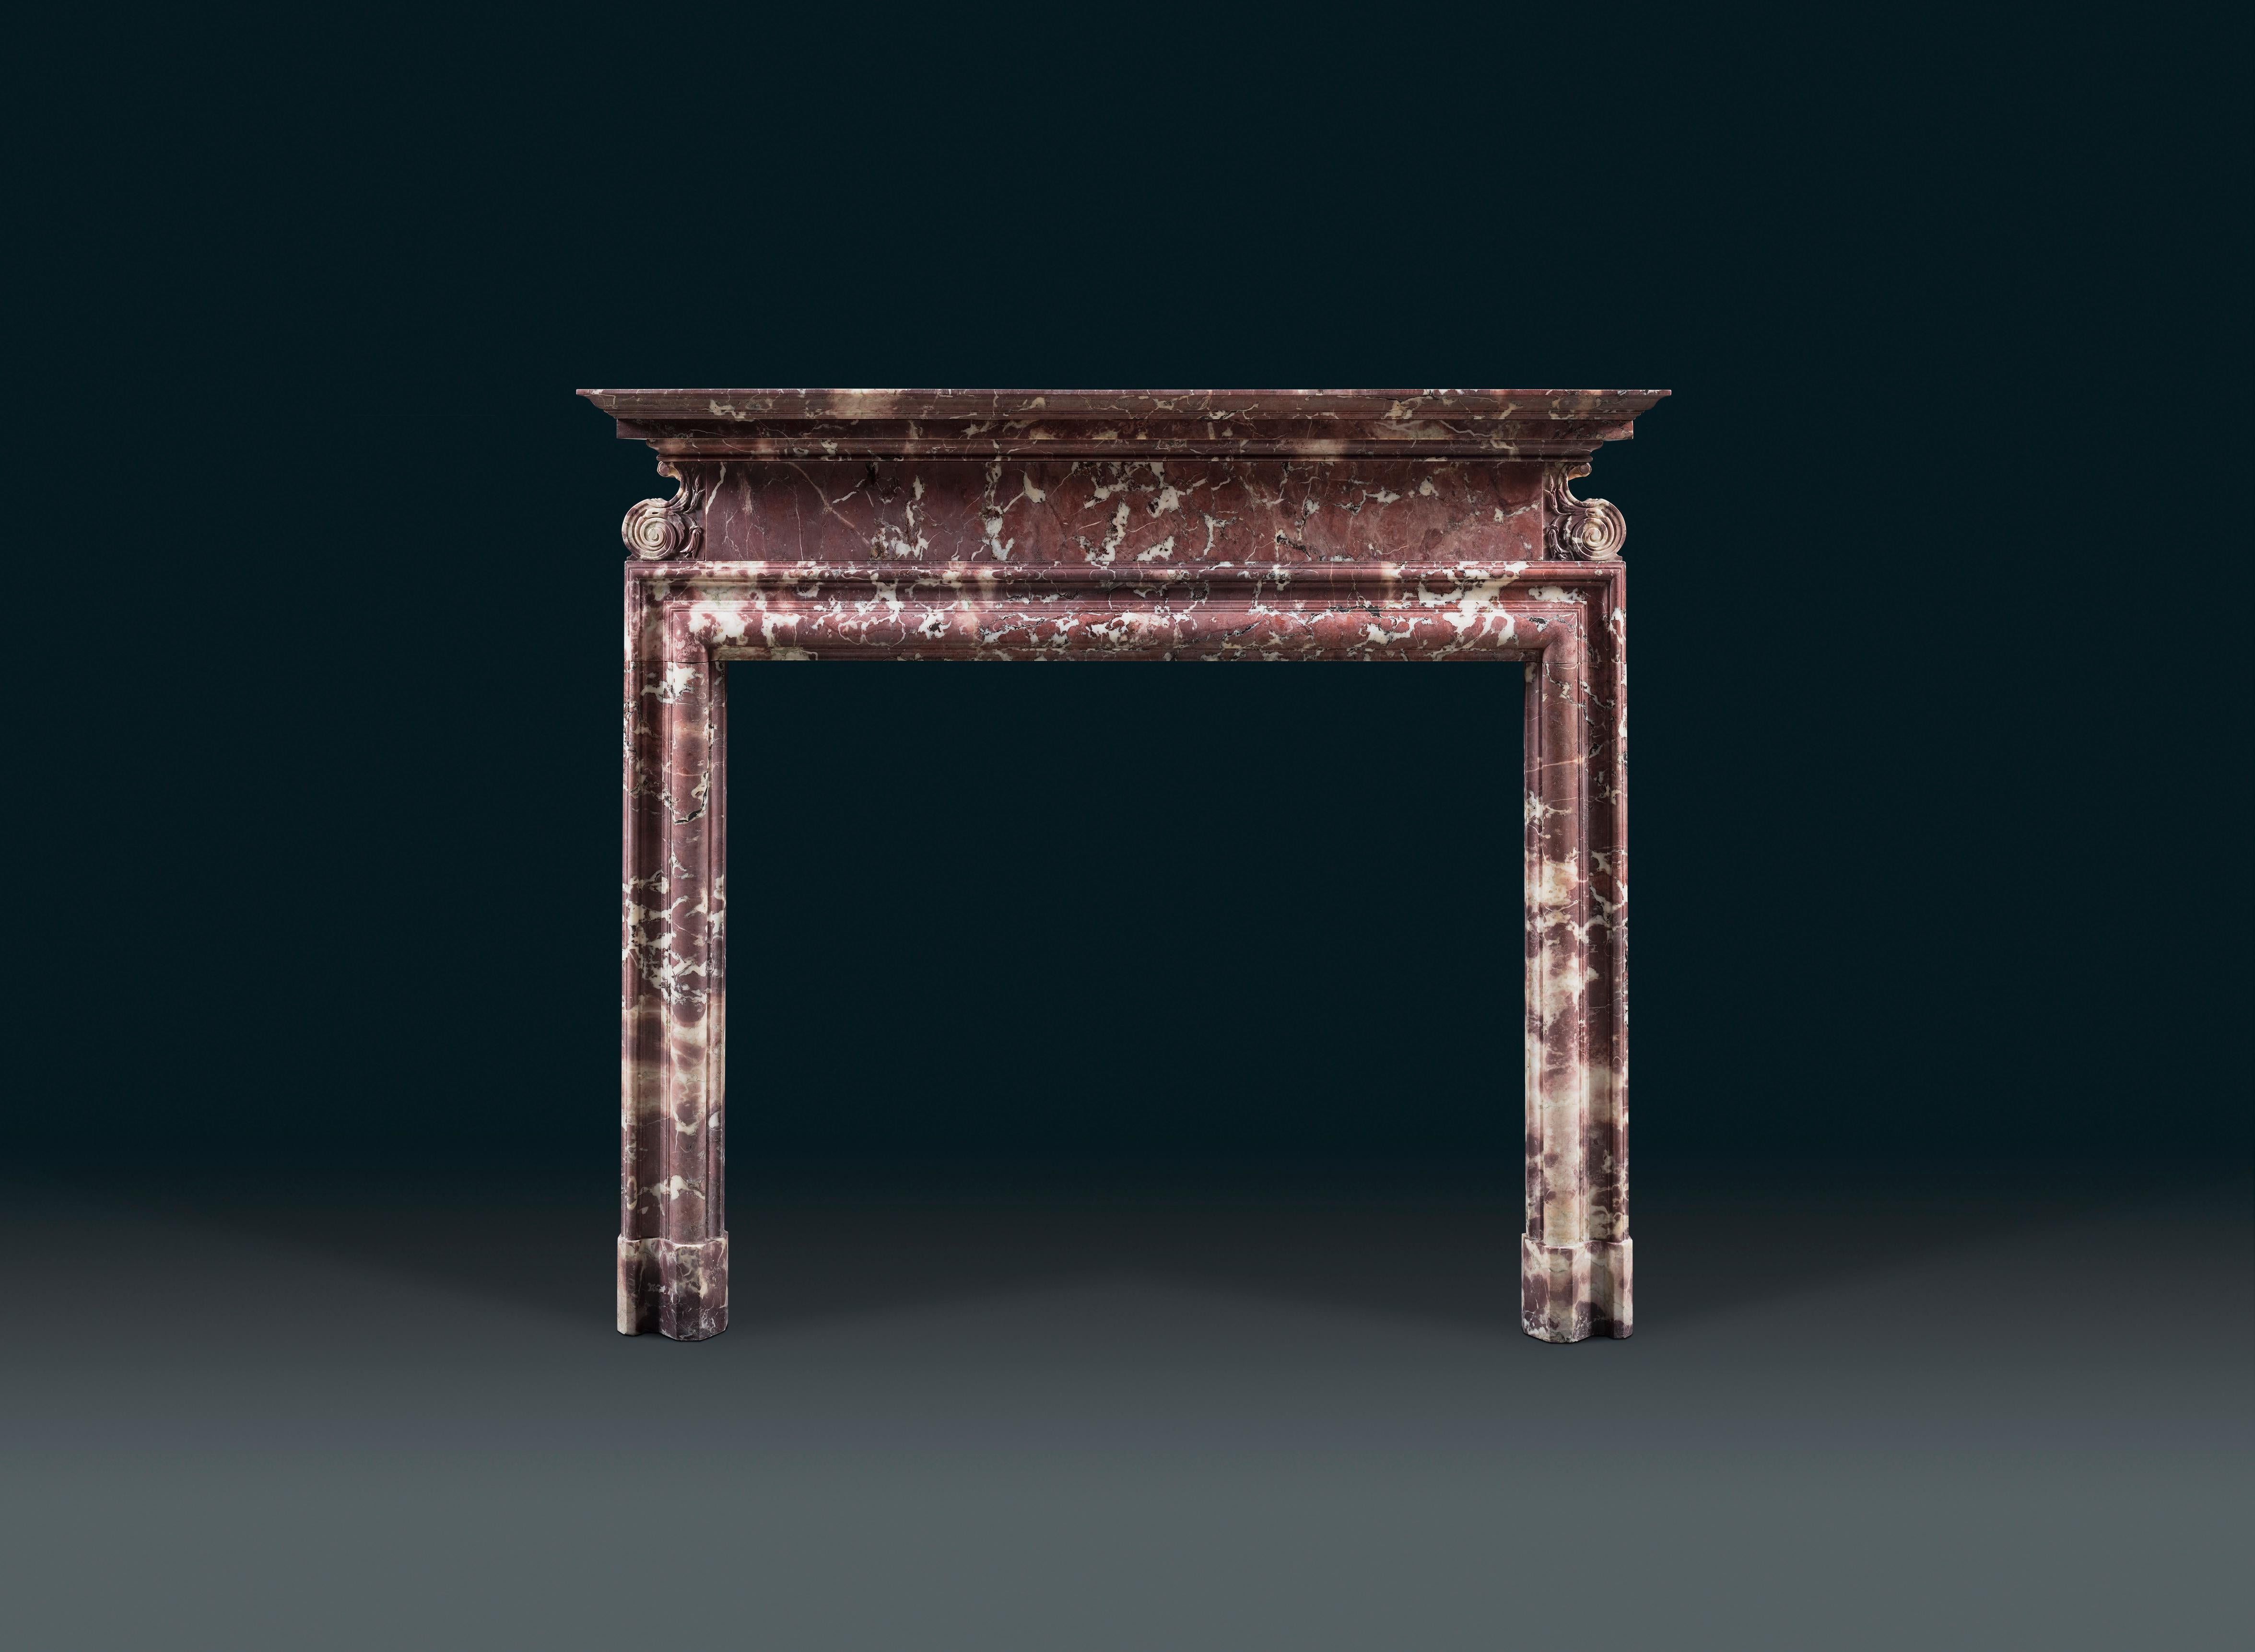 A fine Georgian Revival bolection chimneypiece carved in Breccia Medicea marble with a moulded shelf above a plain frieze flanked by Baroque S scrolls, carved robustly with flourishes of acanthus. Likely by Hoppin & Koen of New York City in New